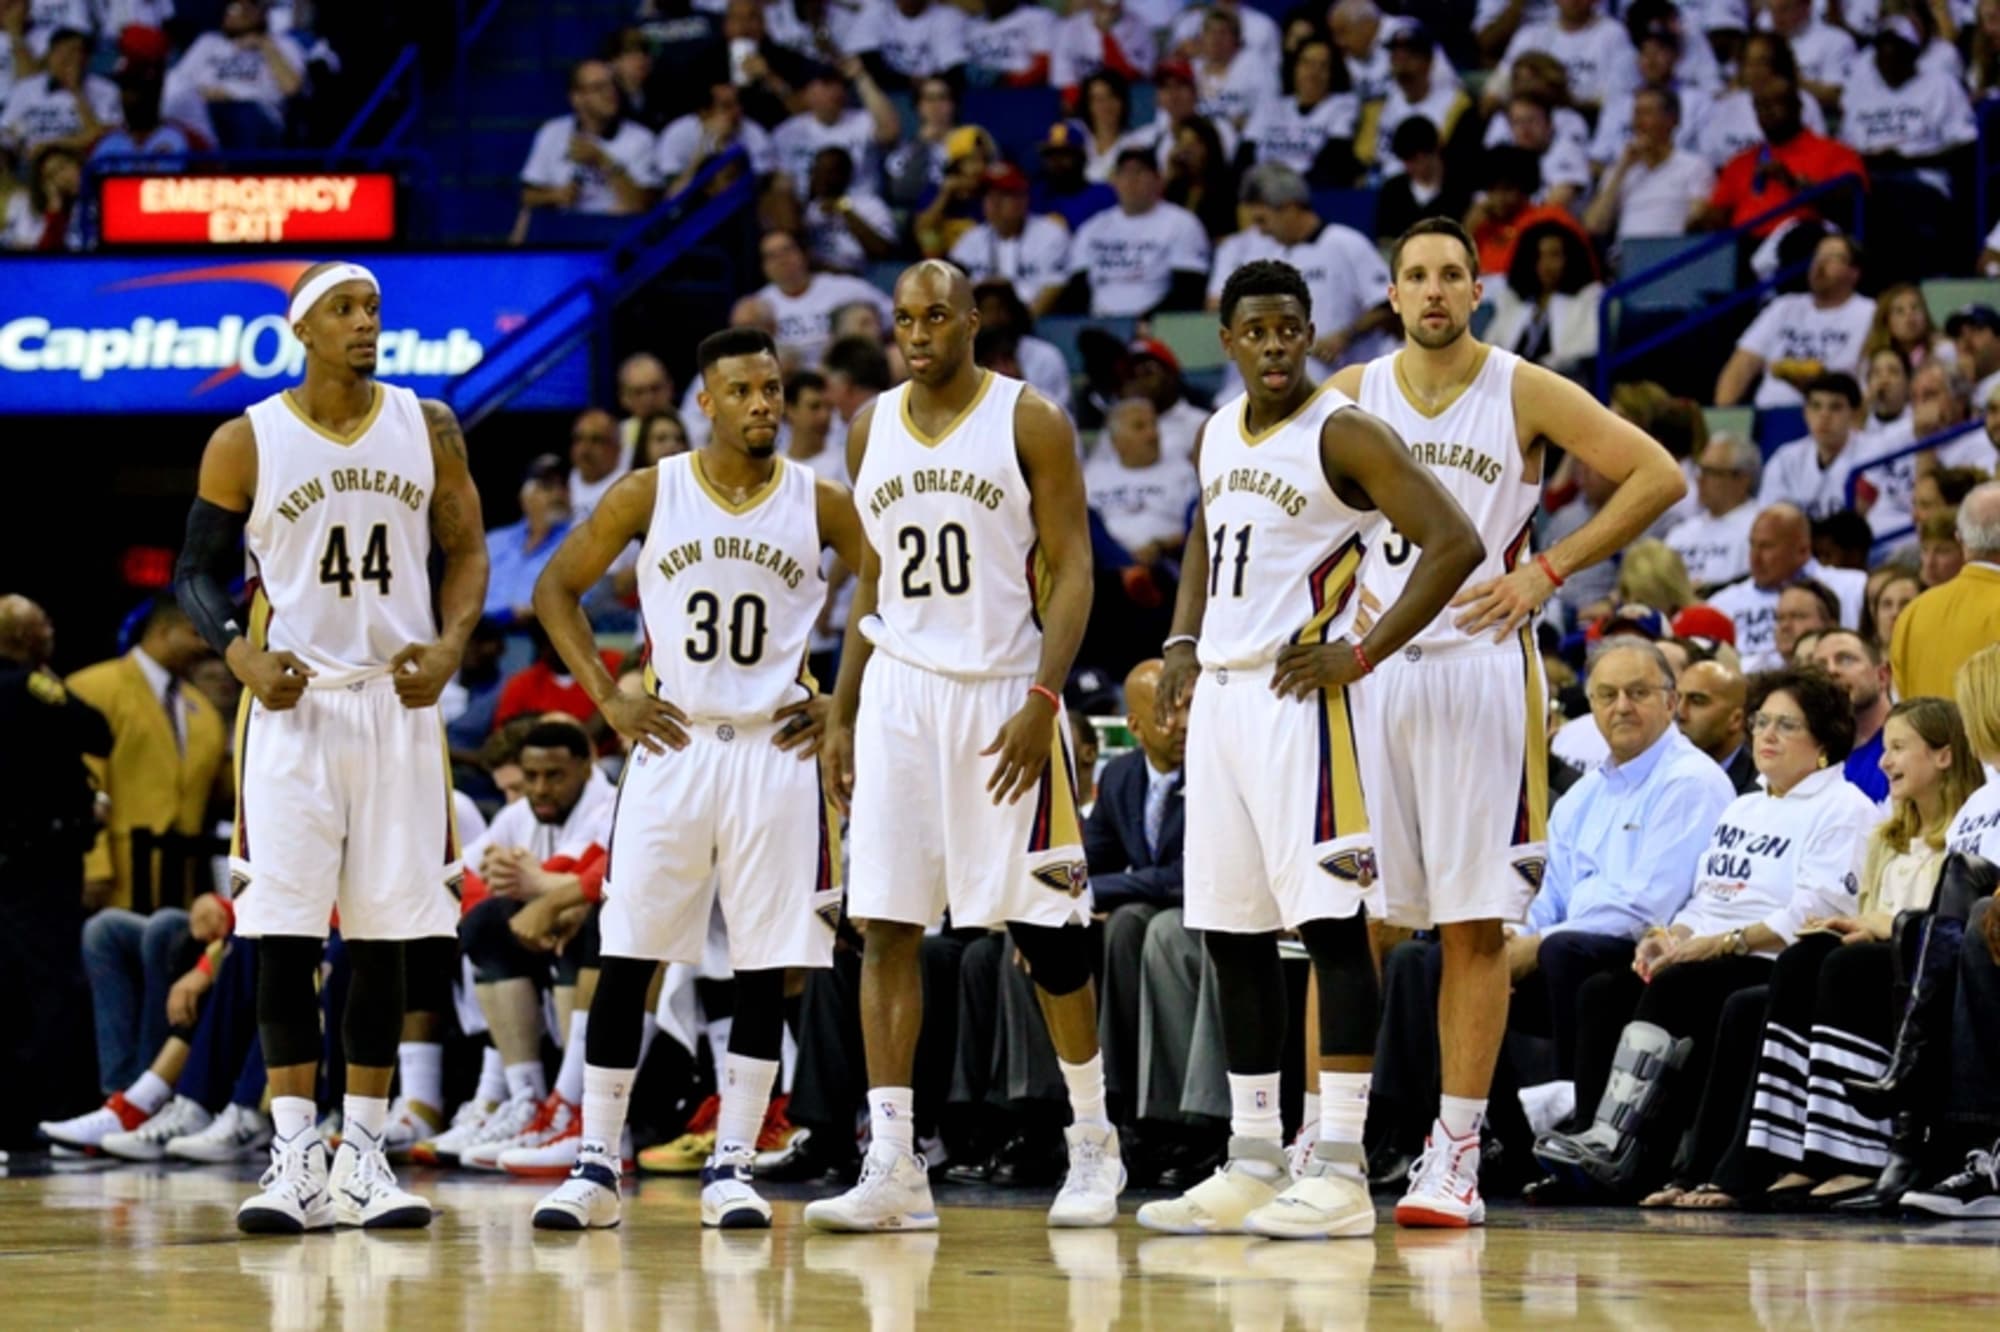 How the Pelicans roster is shaping up for next season… how many